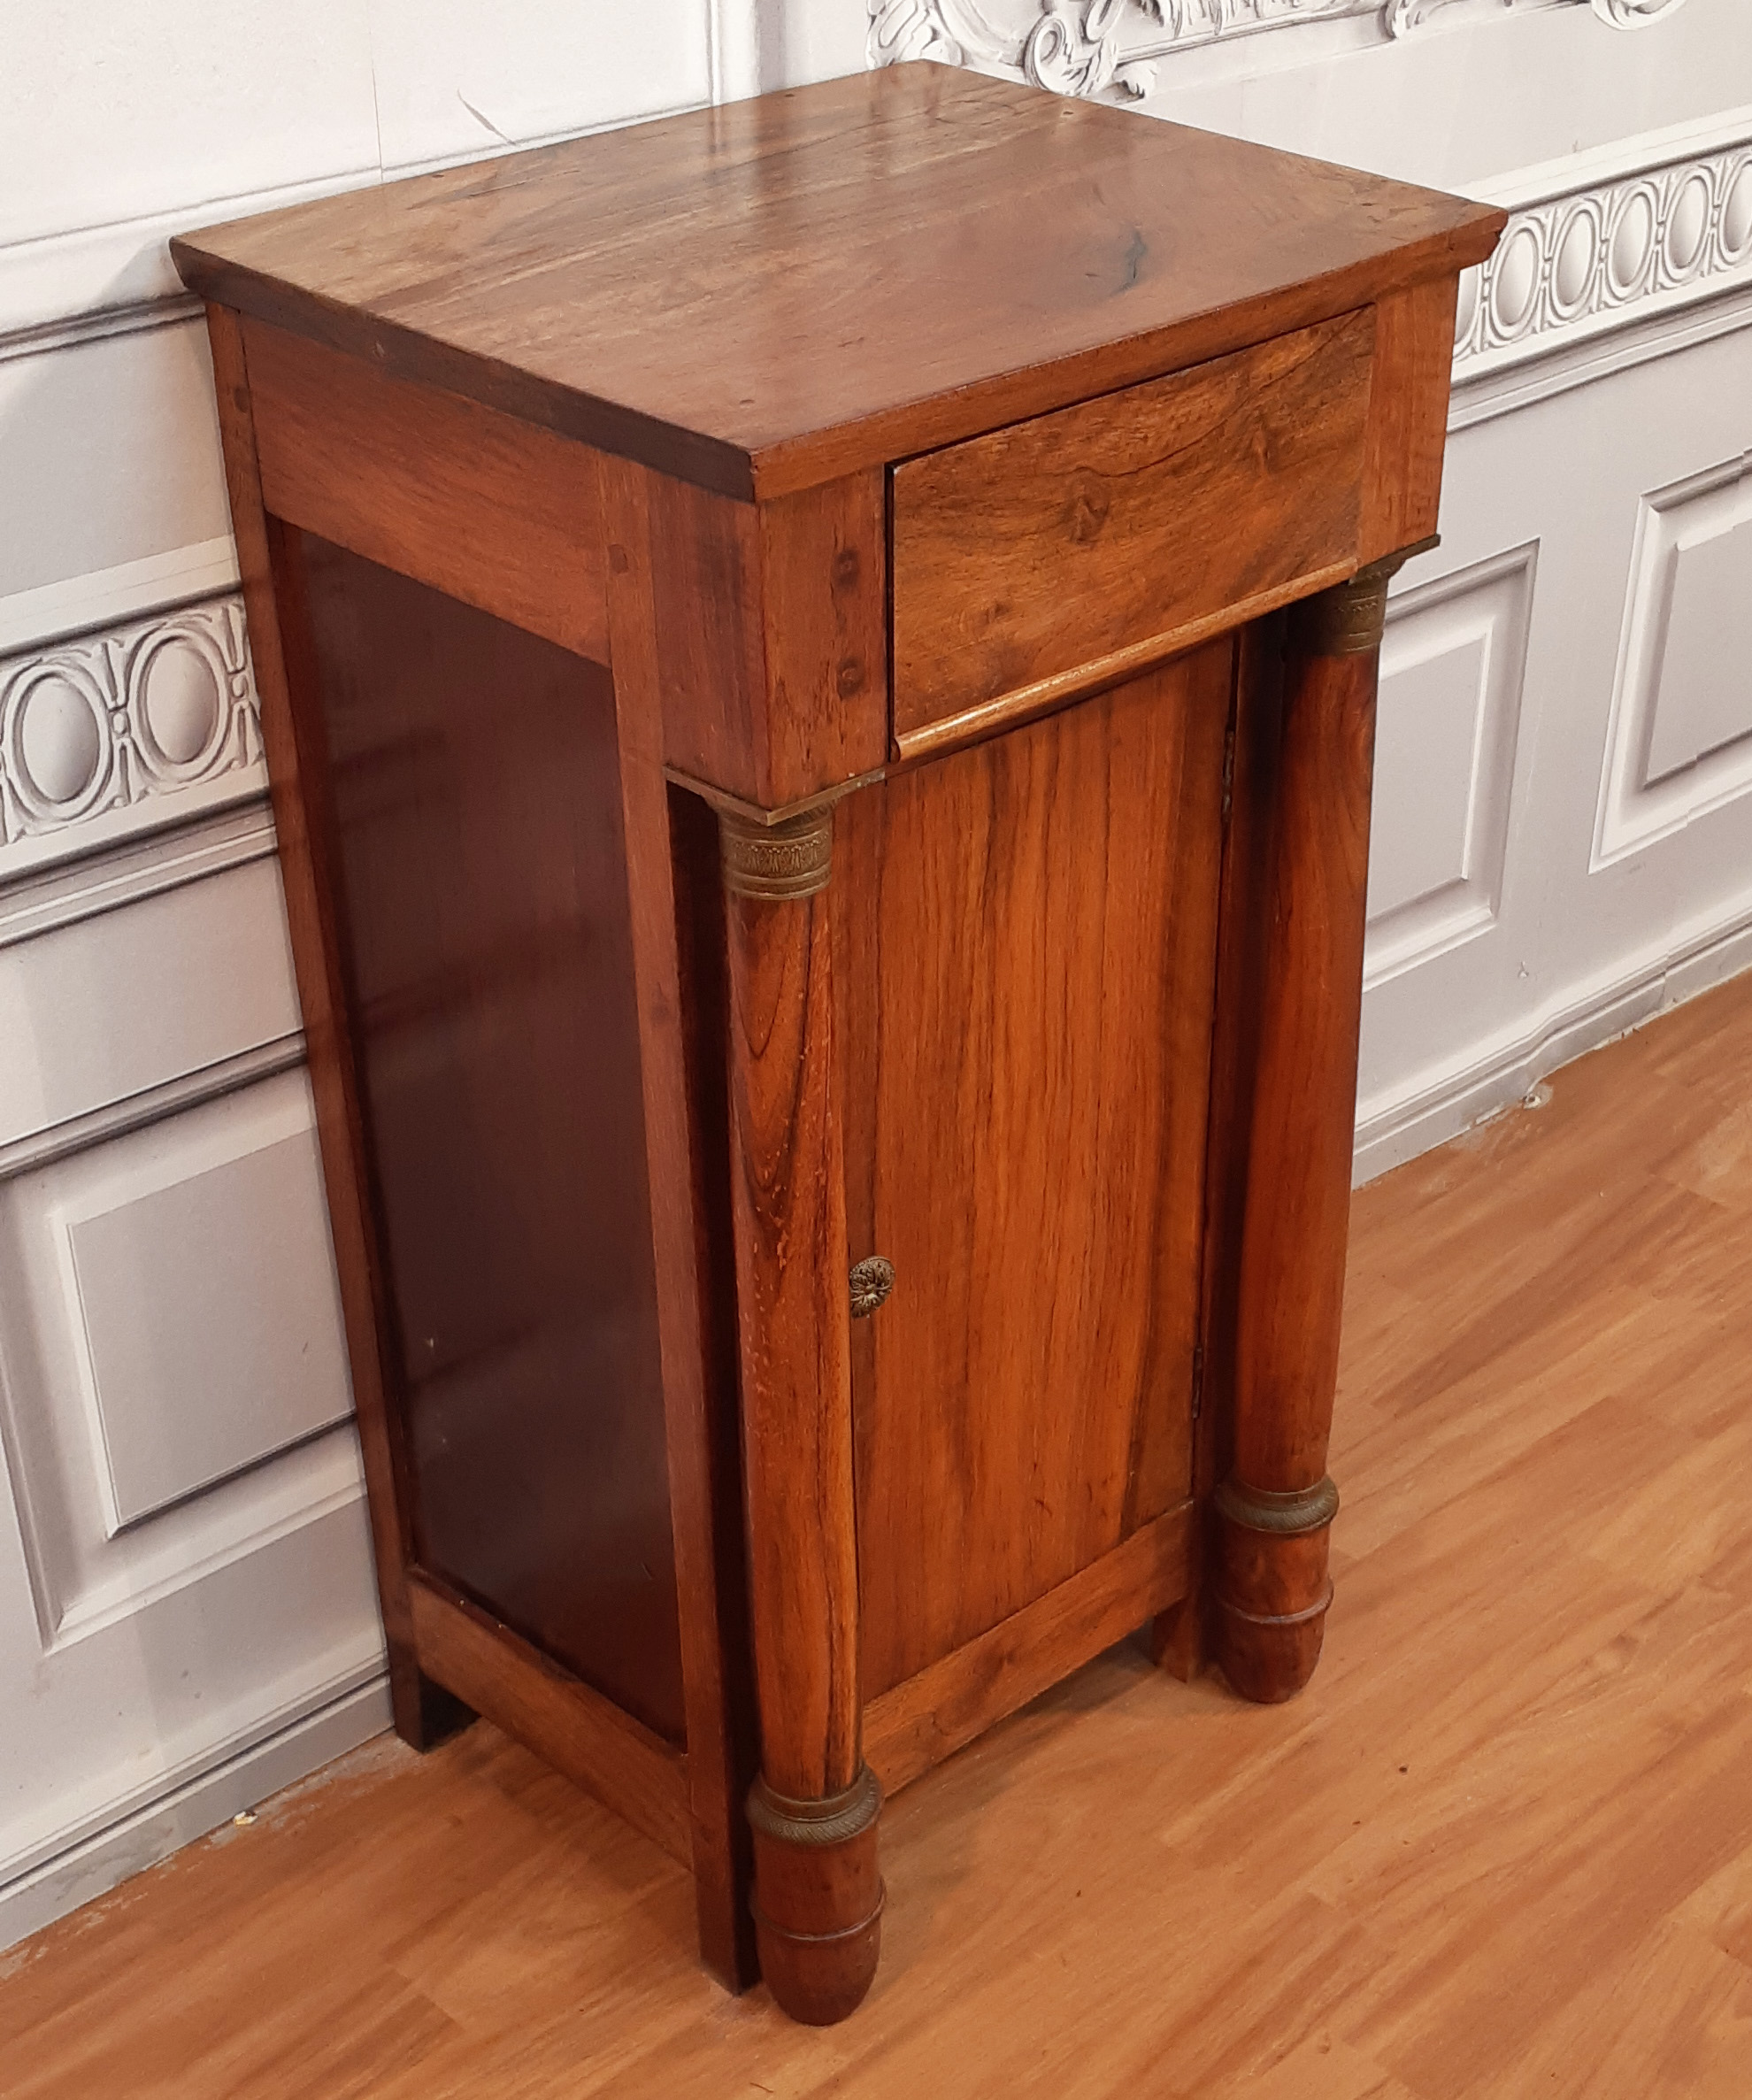 FRENCH EMPIRE ROSEWOOD CABINET 35f34b